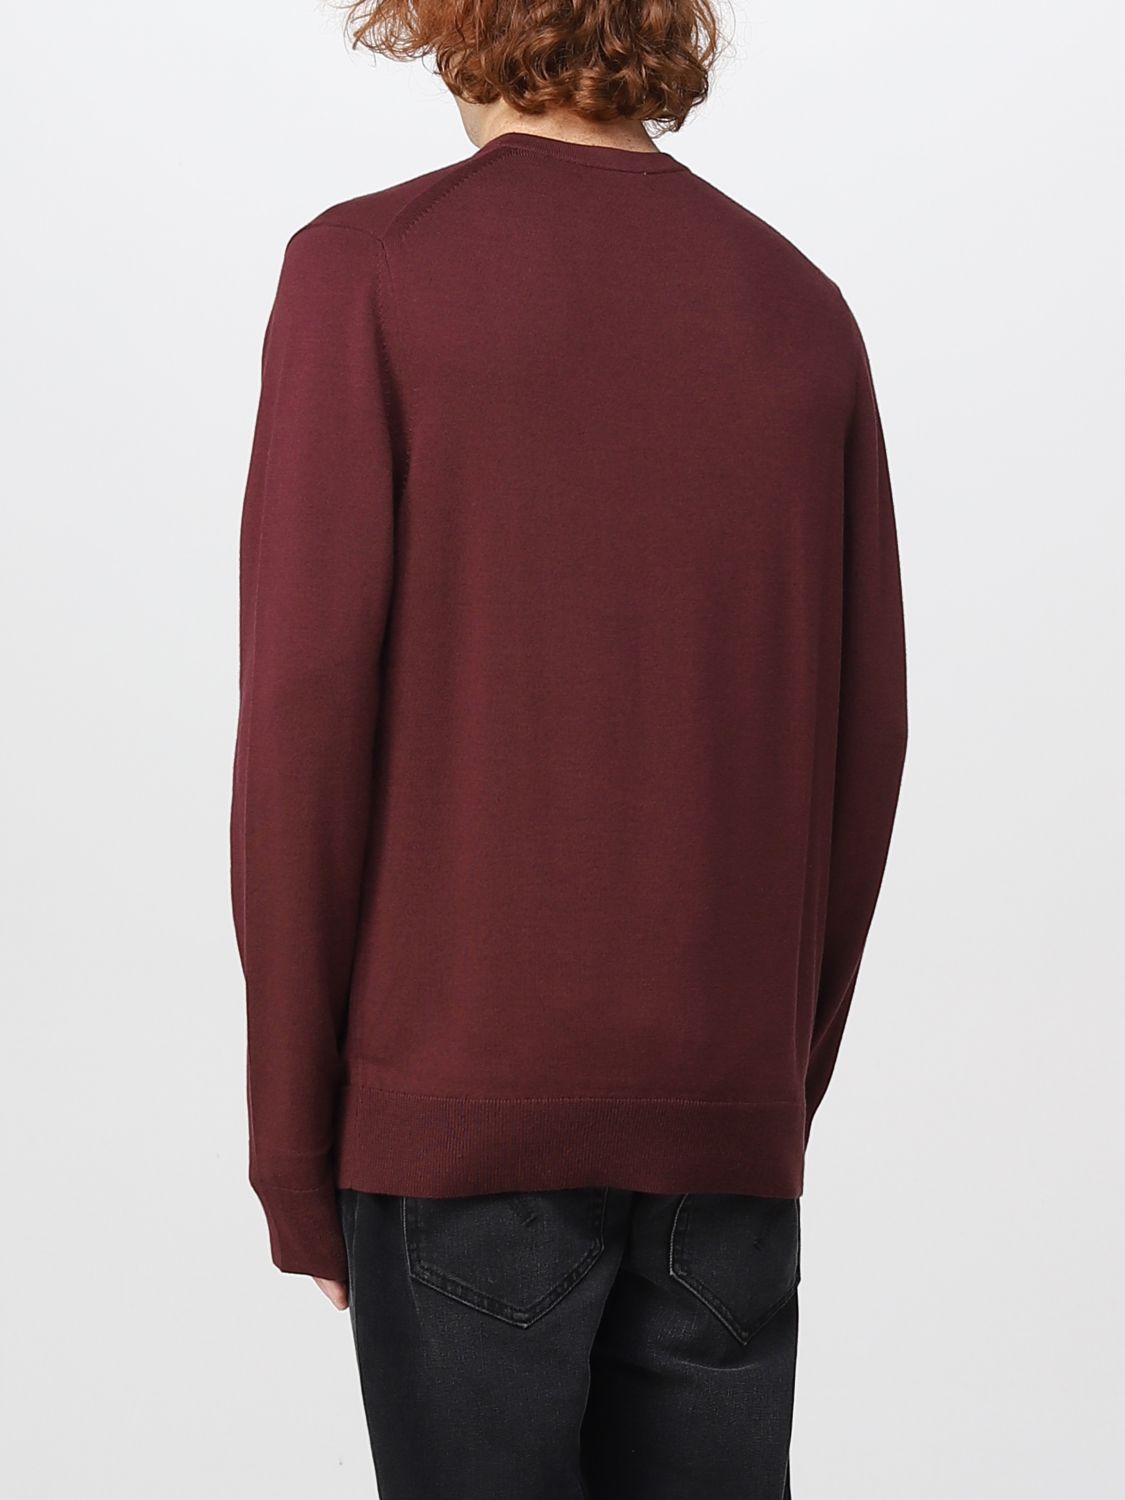 Sweater Fred Perry: Fred Perry sweater for man burgundy 2